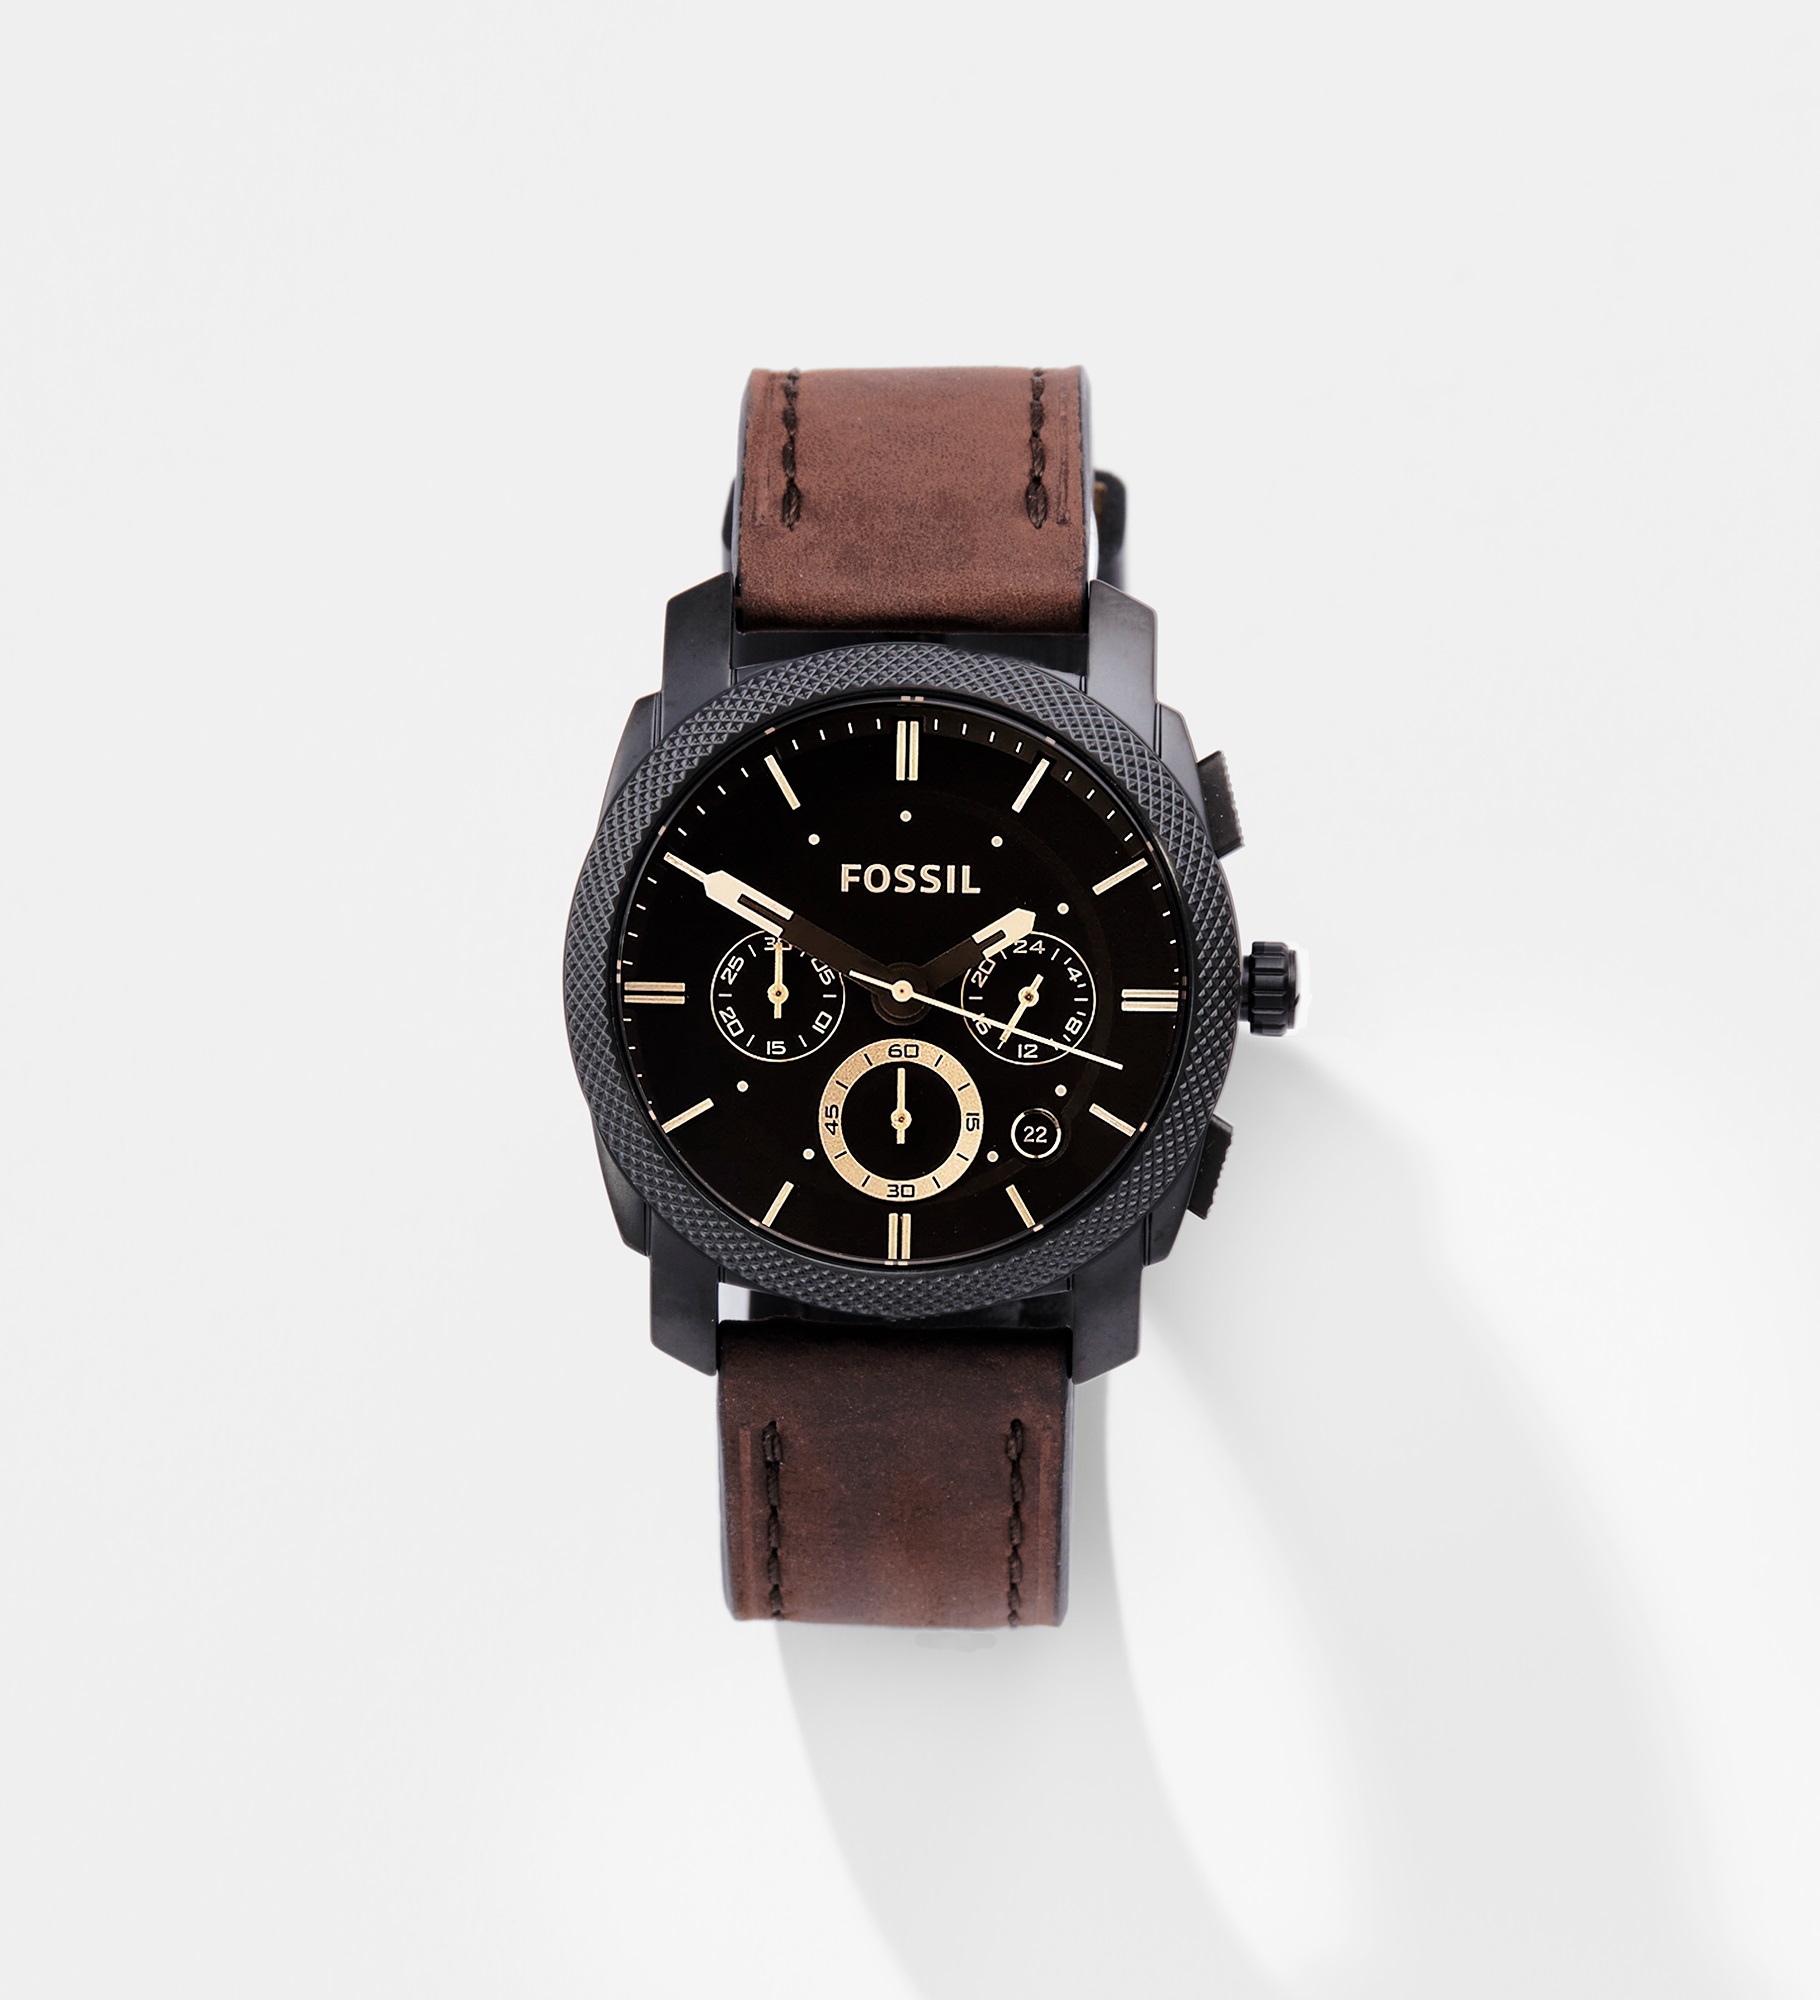  Engraved Fossil Machine Watch with Brown Leather Band